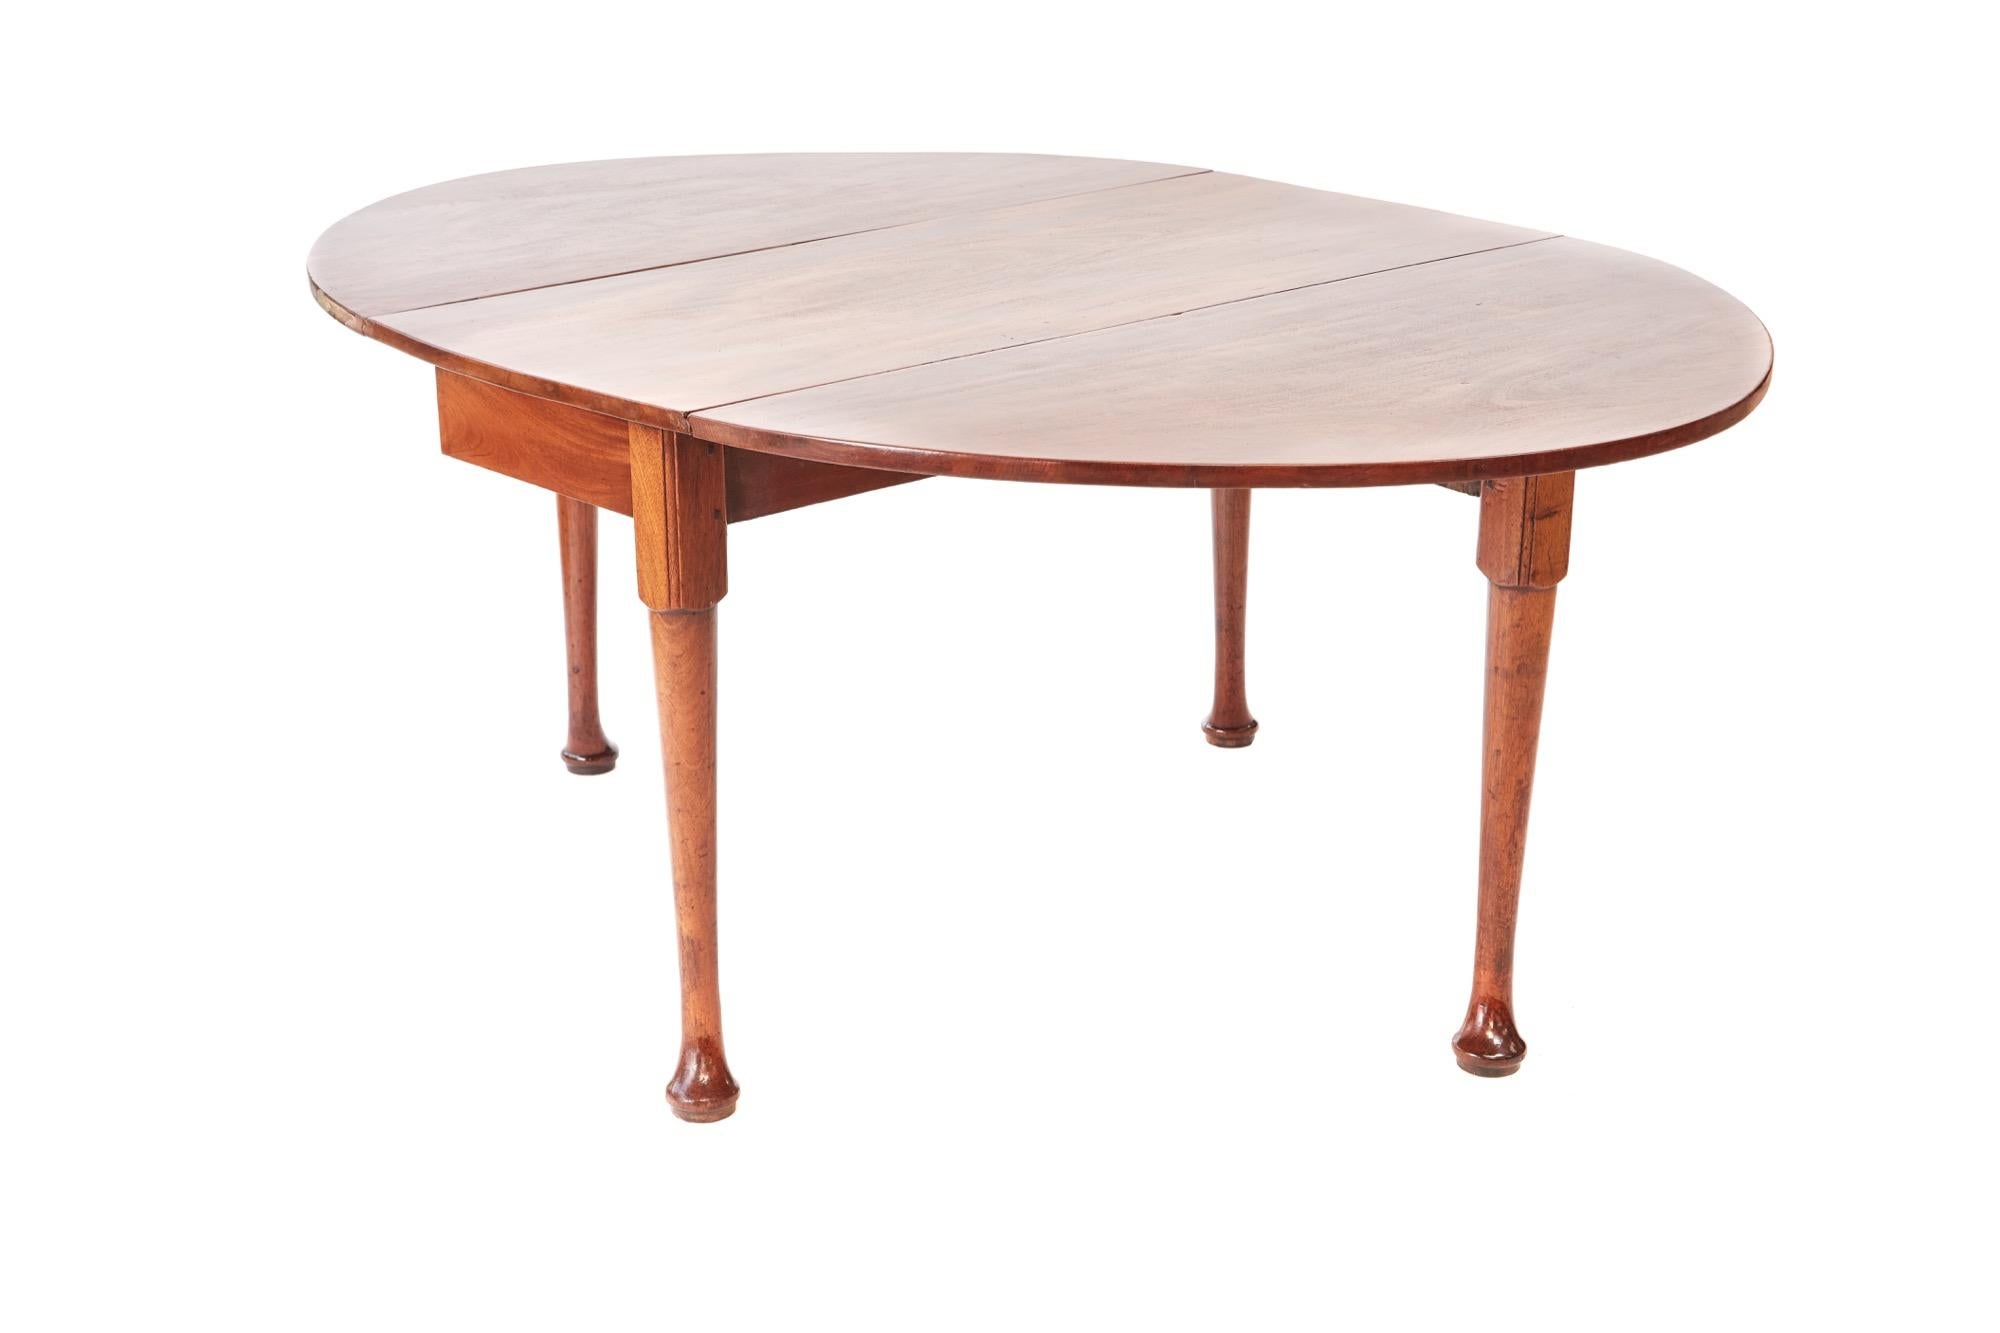 This is a large George III antique mahogany drop leaf dining table which has a fantastic quality solid mahogany top with two drop leaves. It is supported by four turned legs with pad feet.

WORLDWIDE SHIPPING

We are able to ship this item